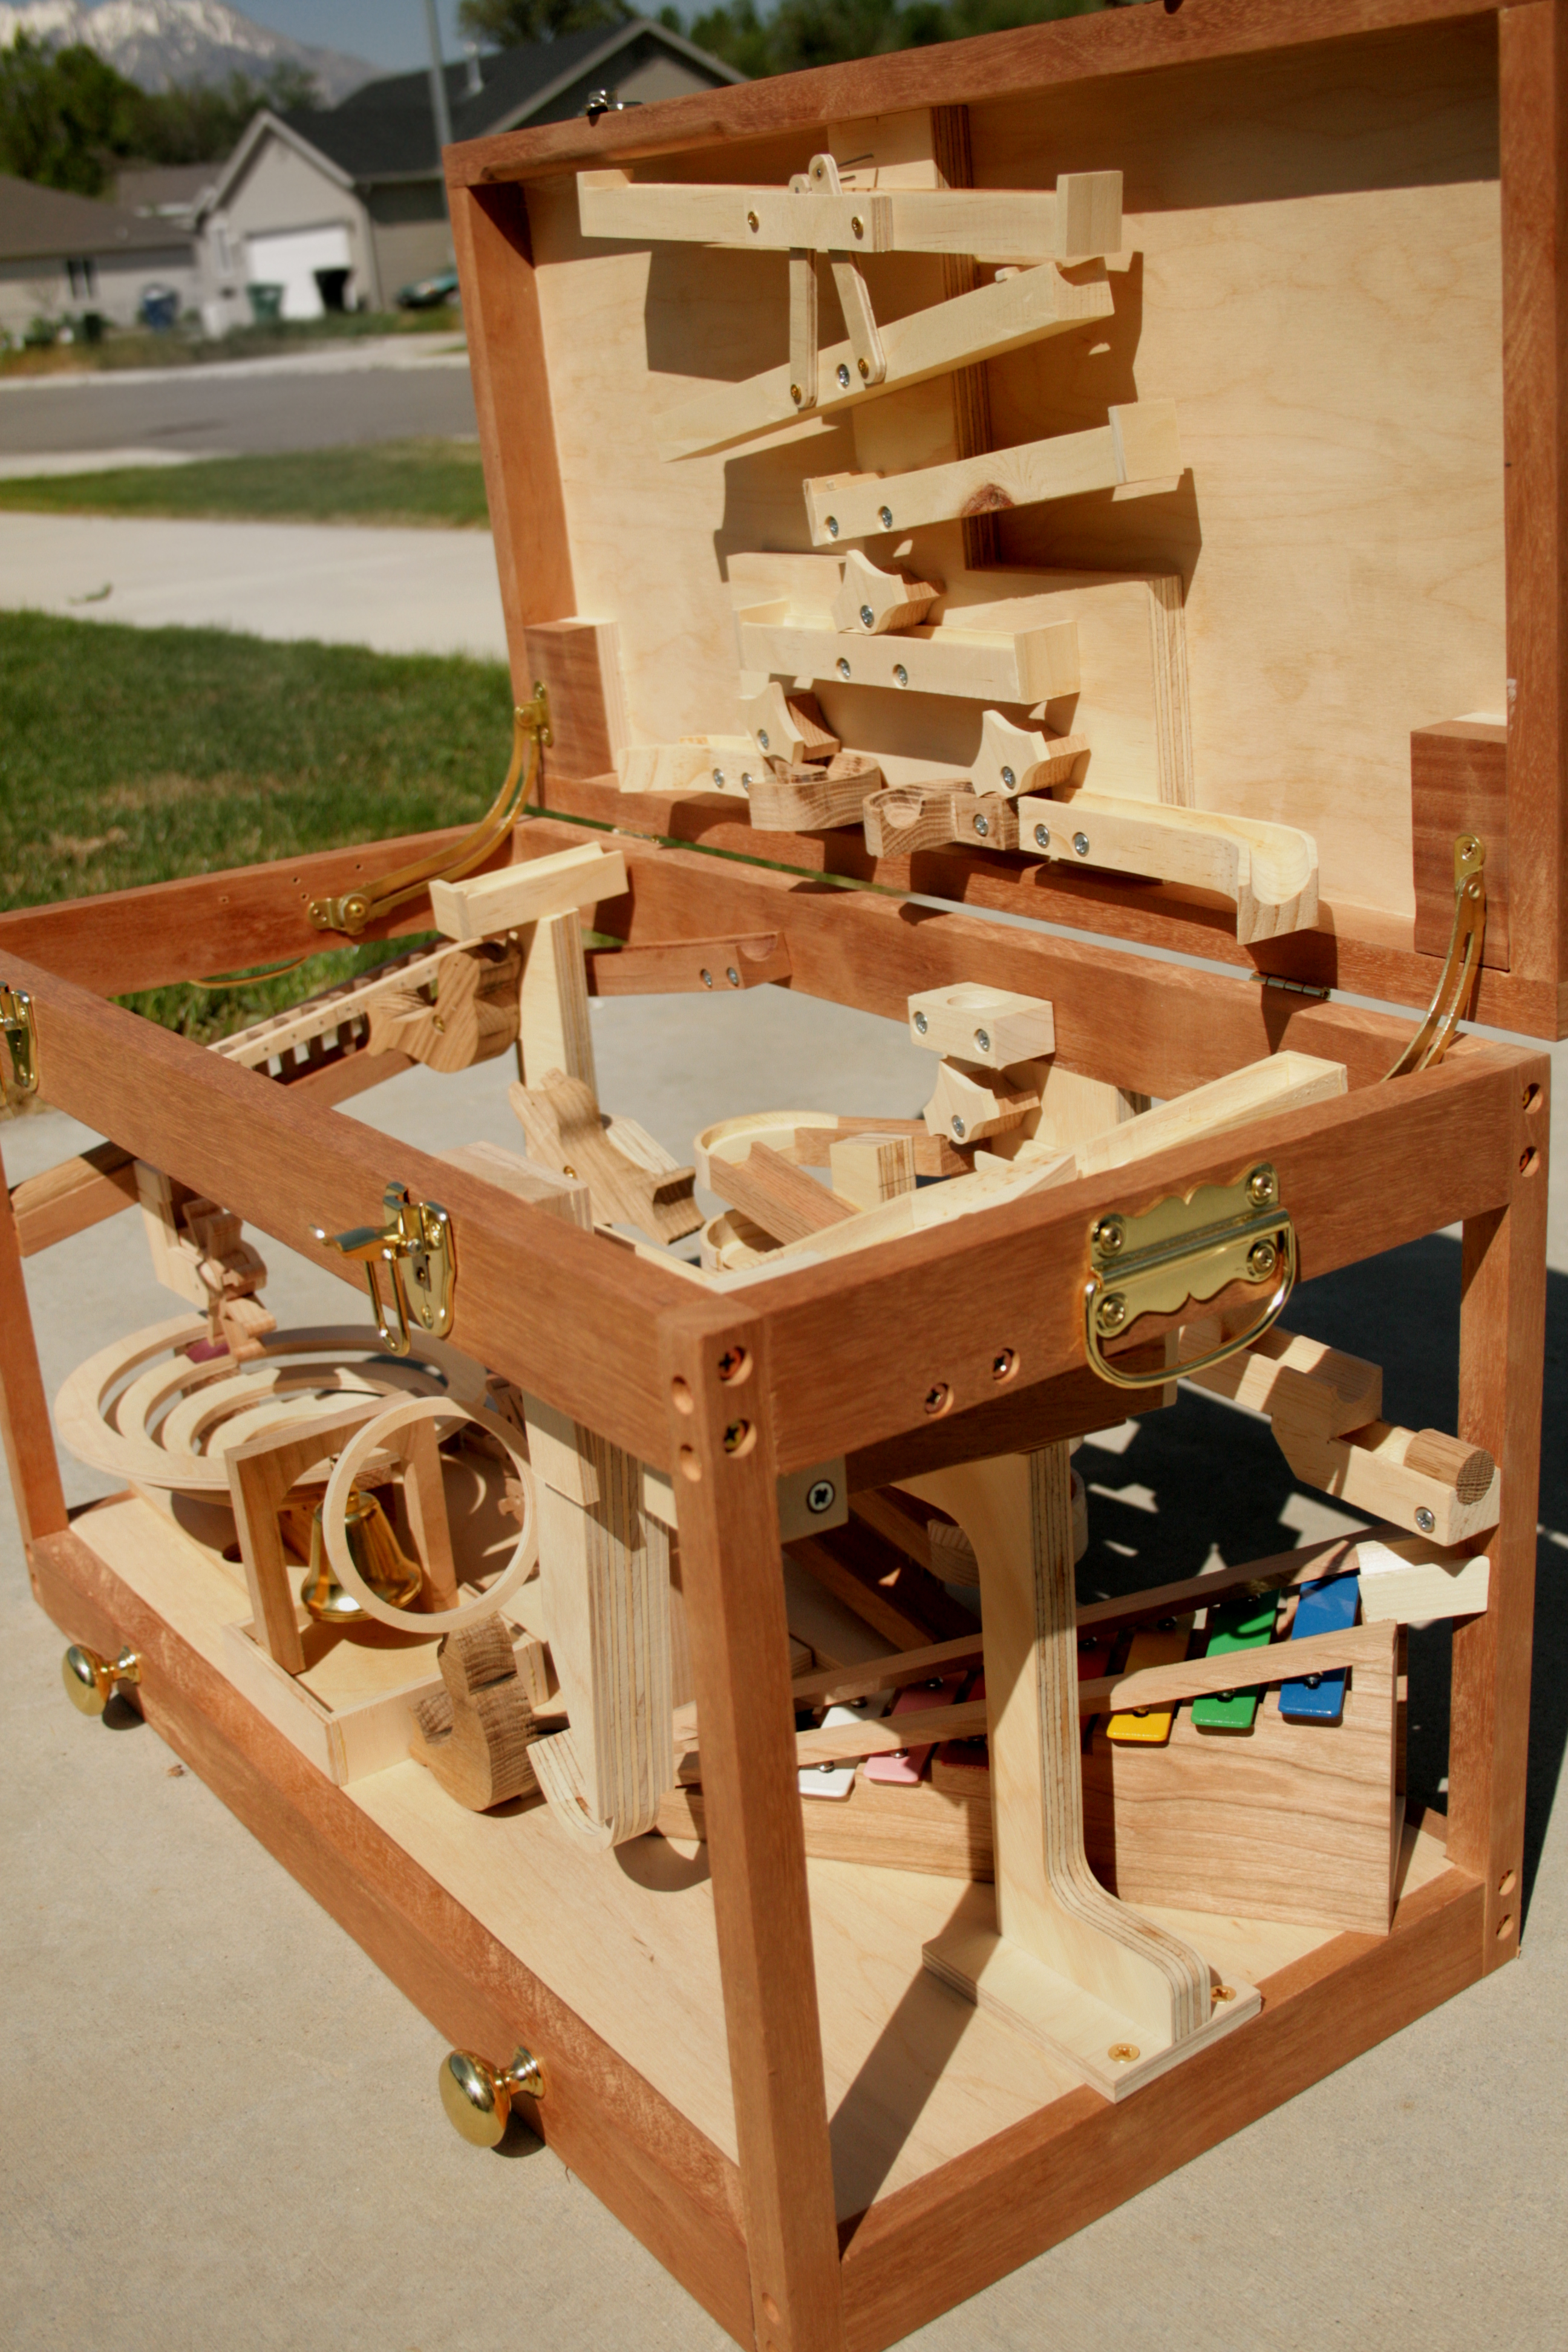 Build Plans For A Wooden Marble Machine DIY PDF wooten 